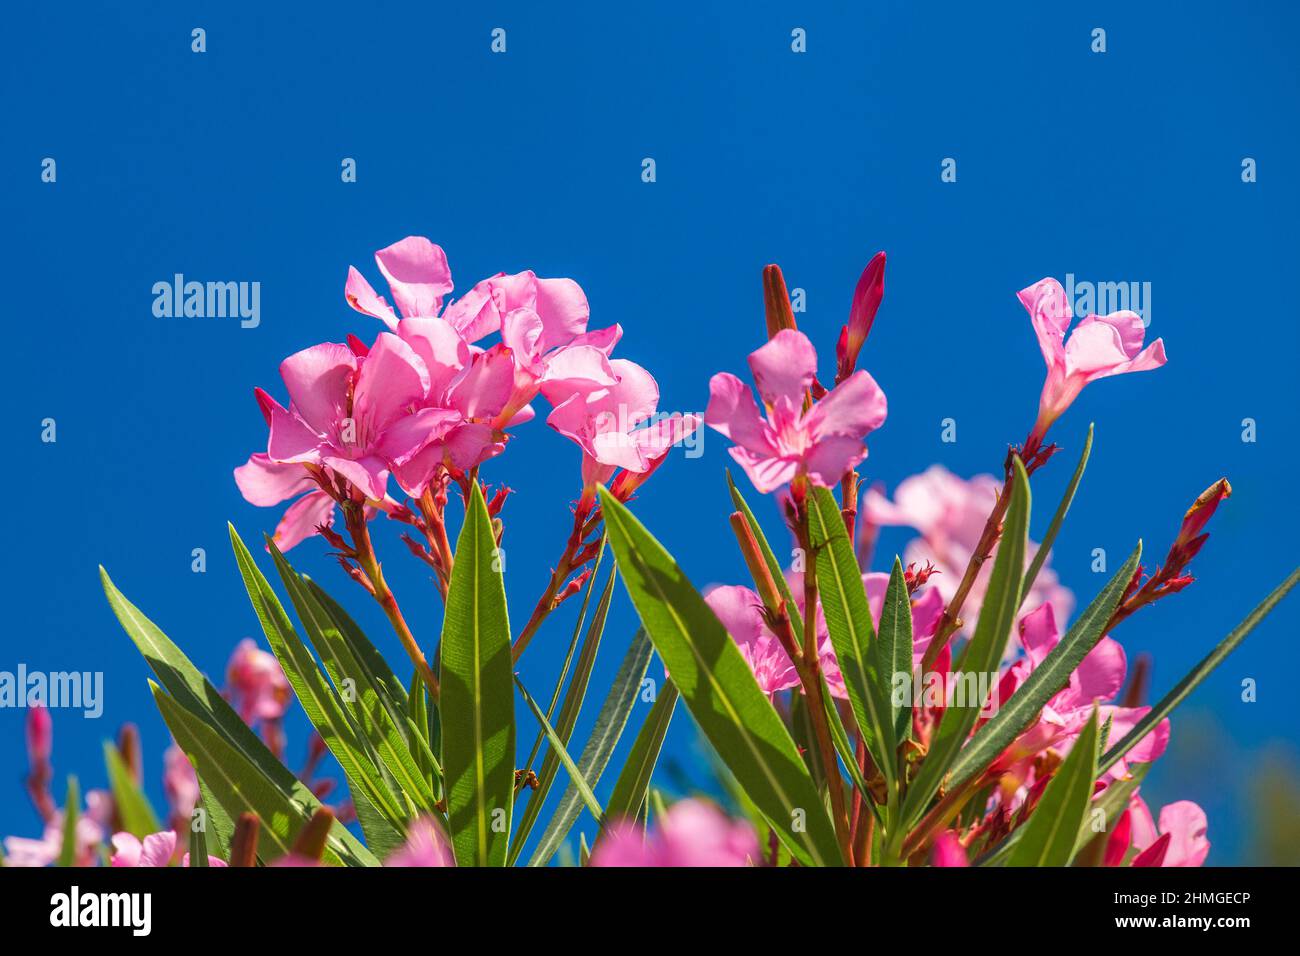 Nerium oleander flowers on a blue sky background. Stock Photo